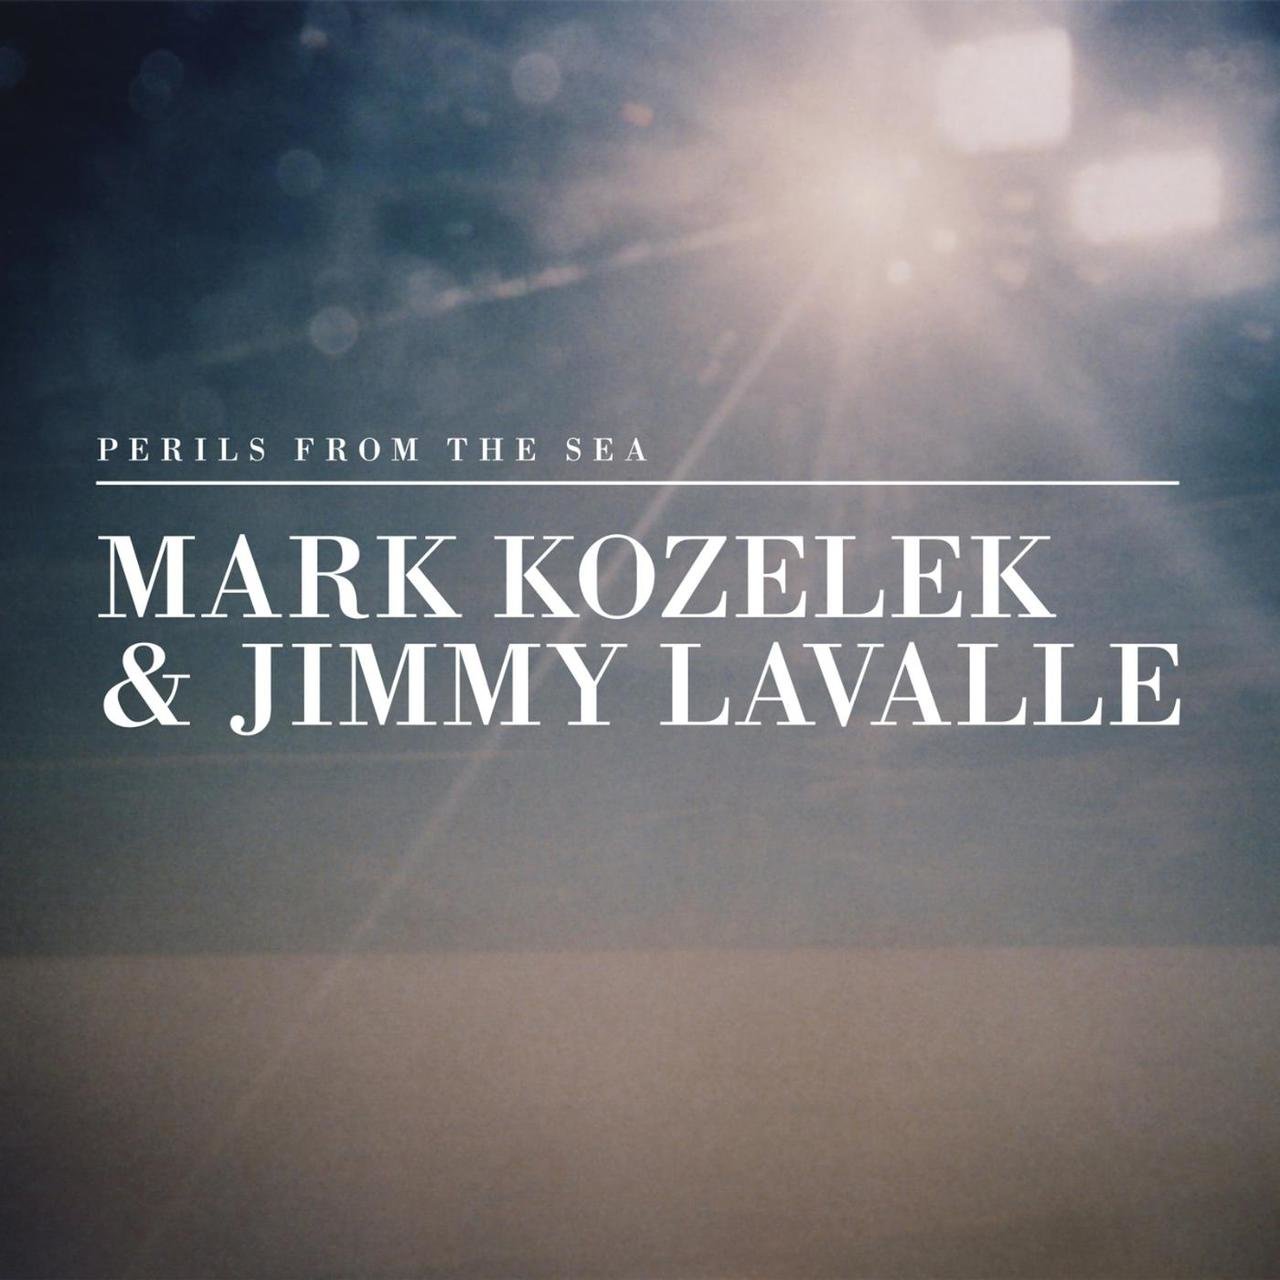 Mark Kozelek and Jimmy Lavalle - Perils from the Sea